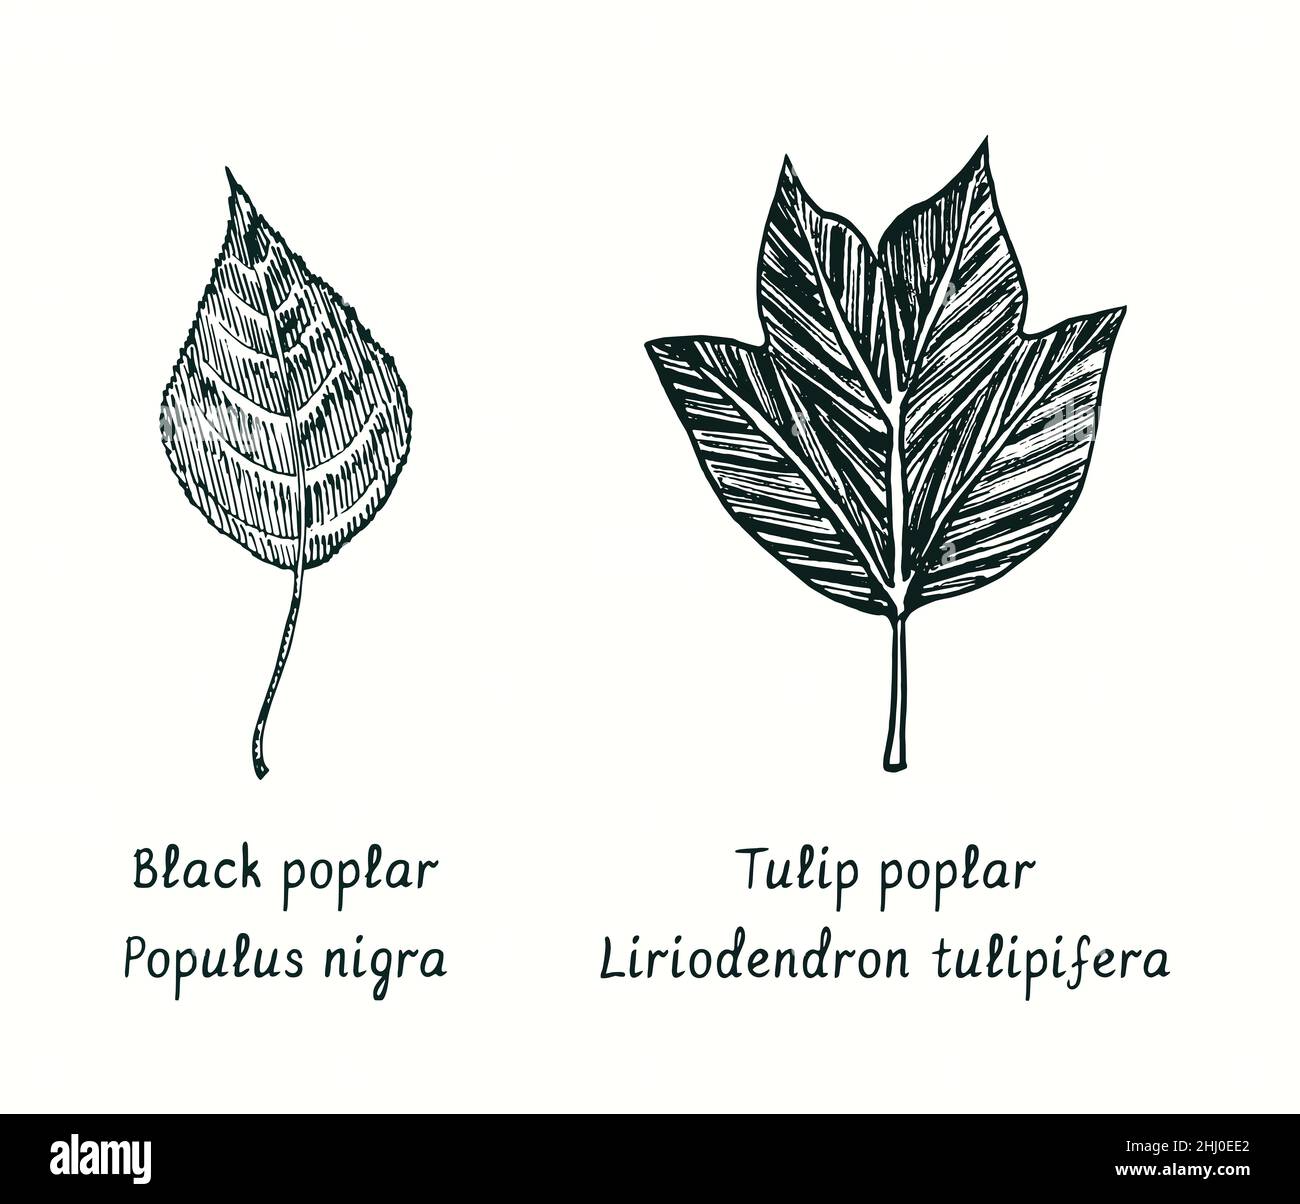 Black poplar (Populus nigra) and Tulip poplar (Liriodendron tulipifera) leaves. Ink black and white doodle drawing in woodcut style. Stock Photo